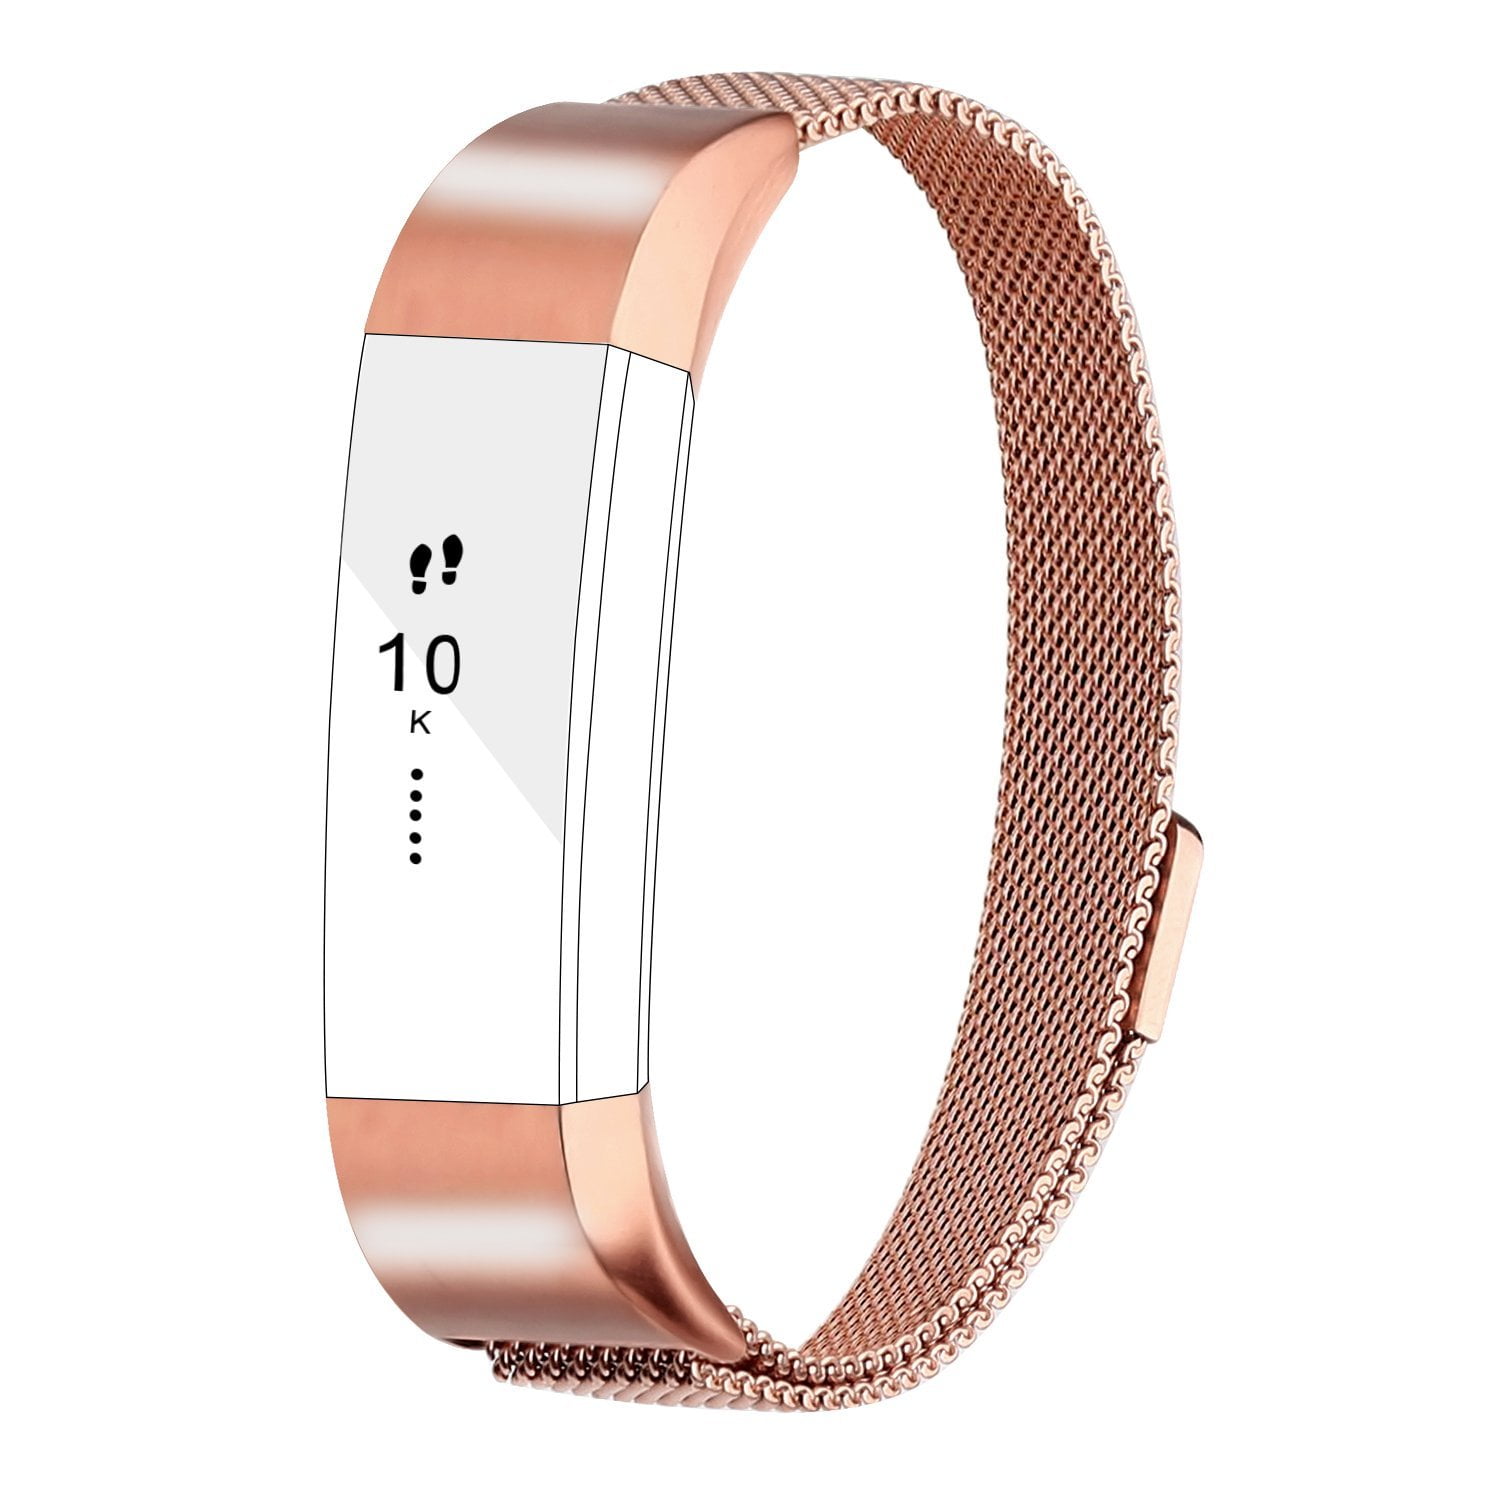 For Fitbit Alta Bands Alta HR Bands, Replacement Accessories Milanese Loop Stainless Steel Metal Bracelet Strap with Magnet Lock for Fitbit Alta HR Wristband-Rosegold - image 1 of 7